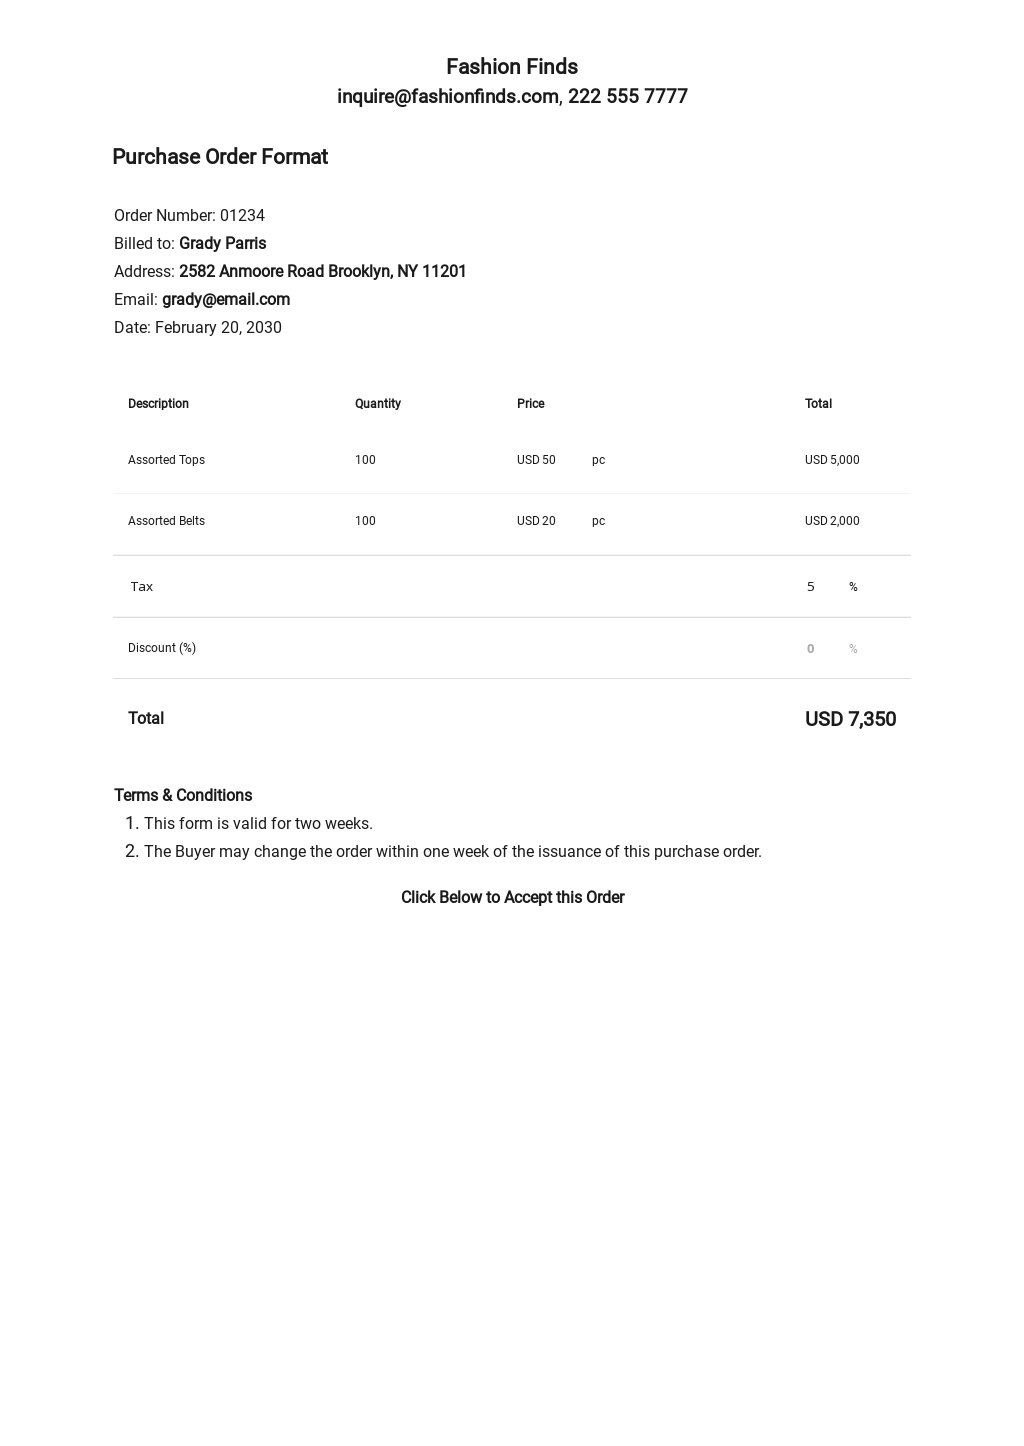 Free Purchase Order Format.jpe